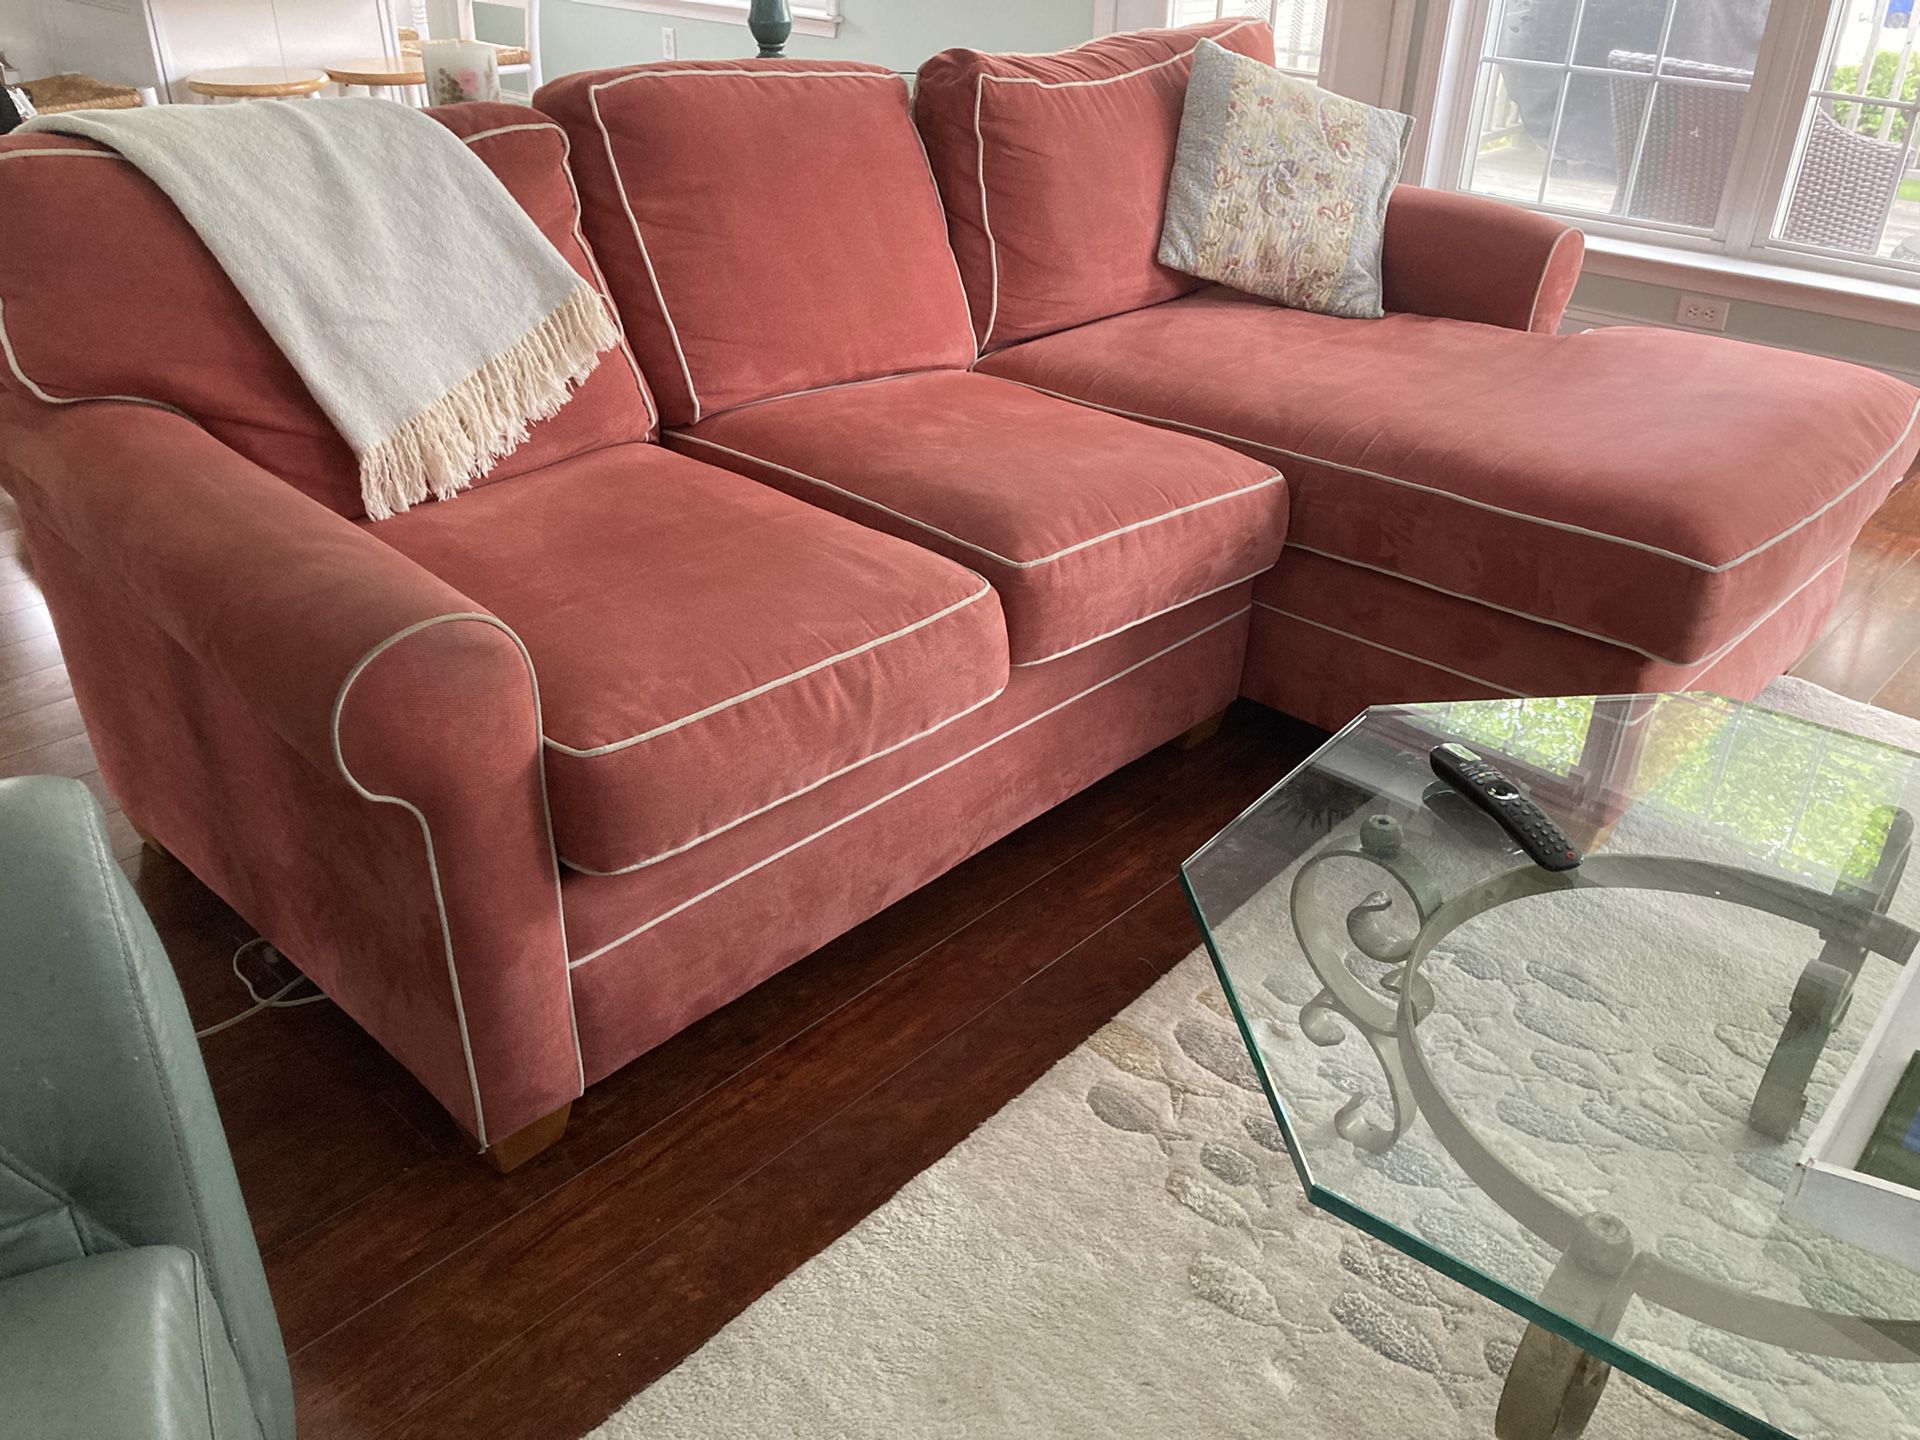 Brick-colored Sofa With Built-in Chaise